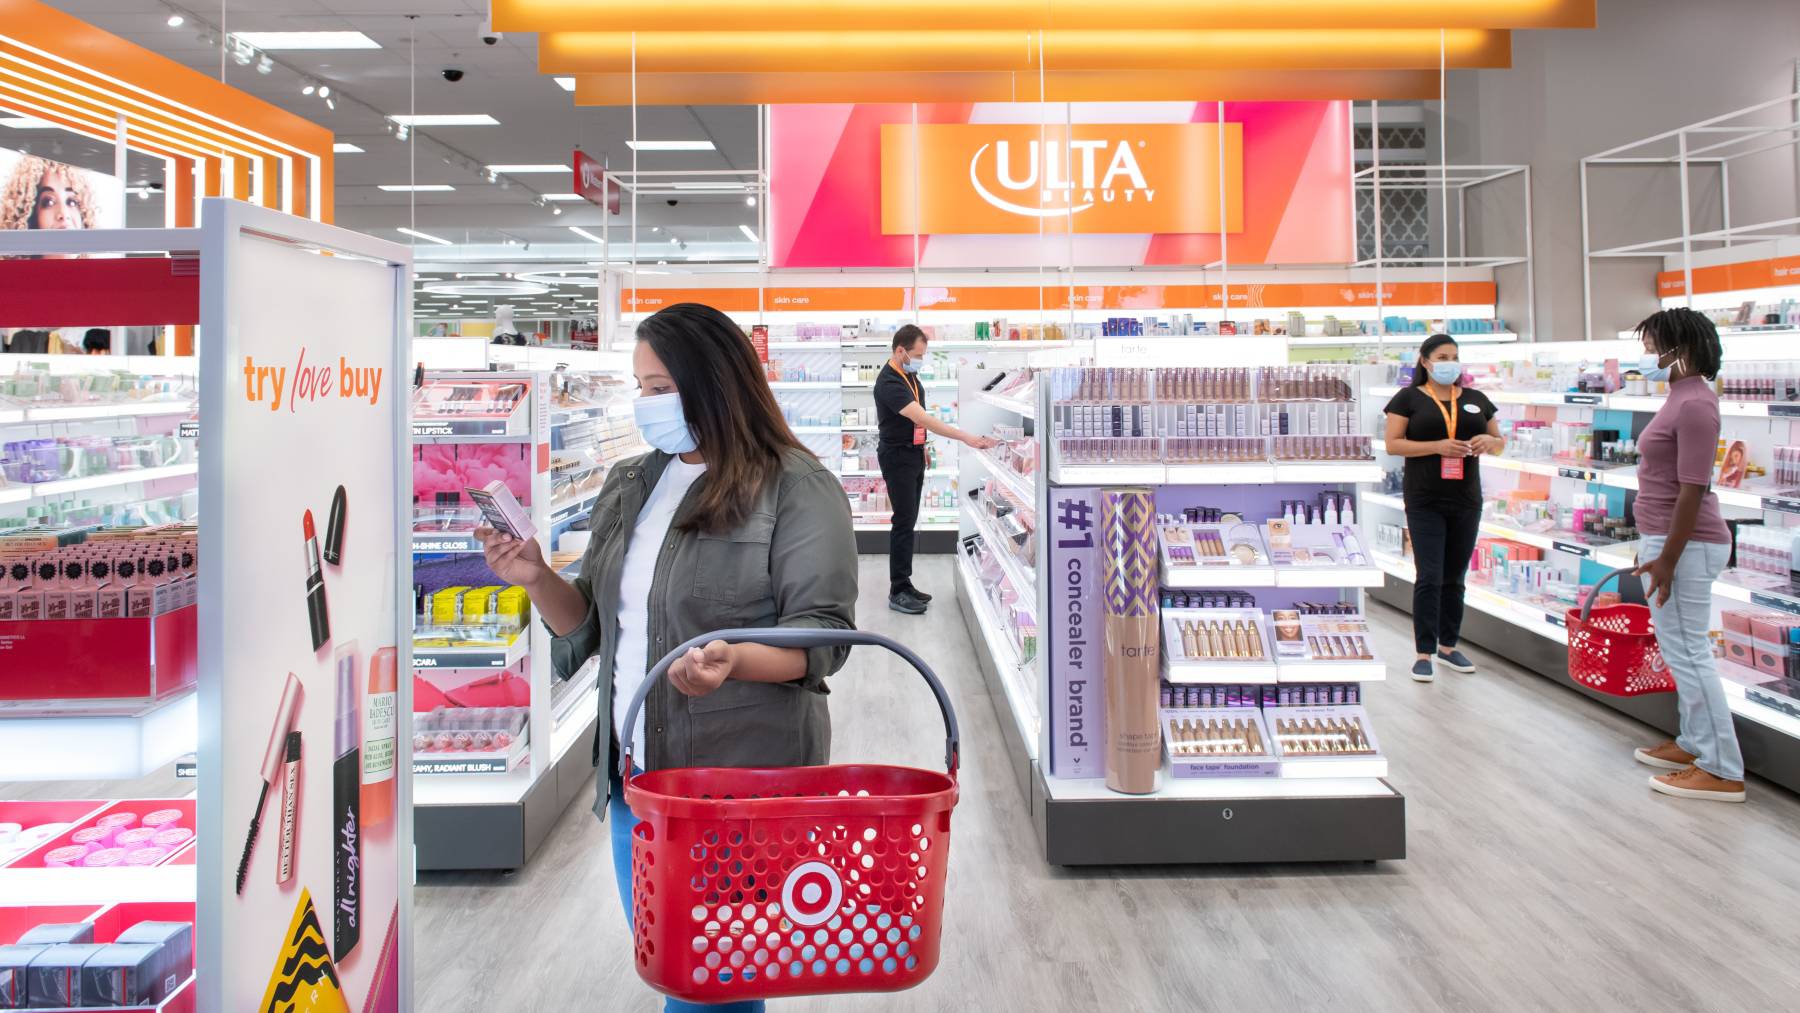 Target will open 100 Ulta shops in its stores this month.